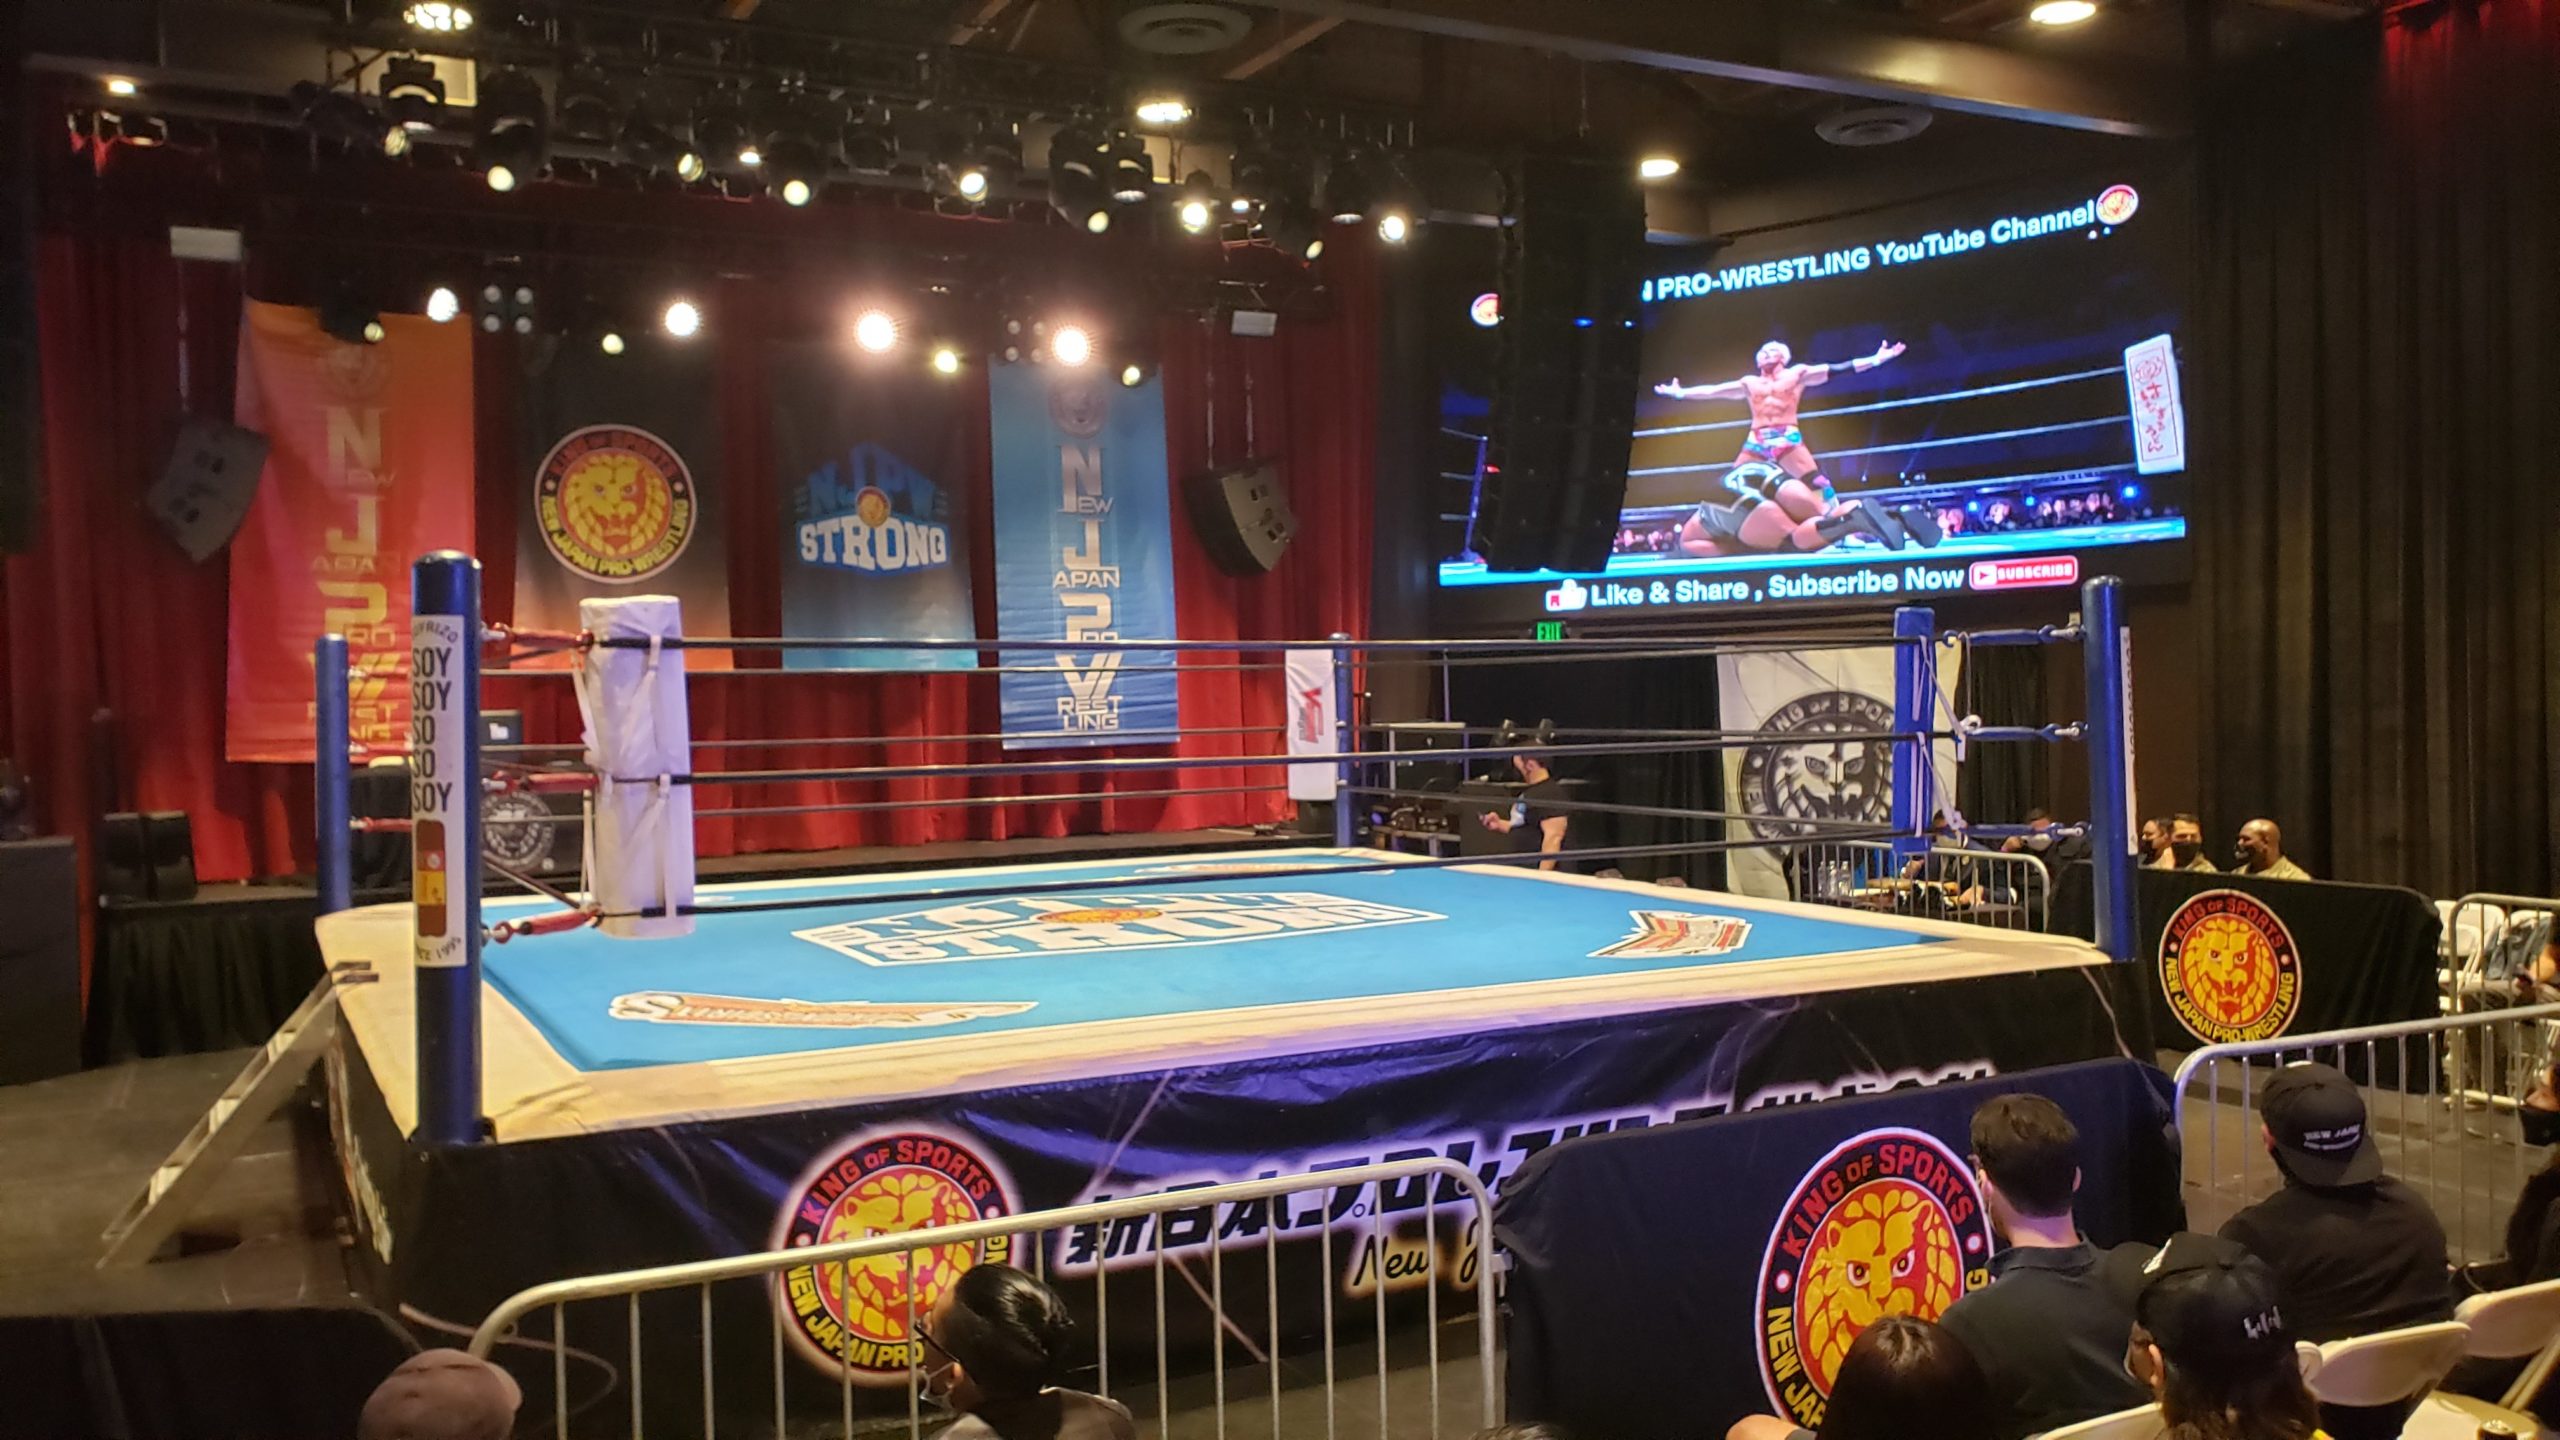 Lineup for tonight’s NJPW Strong